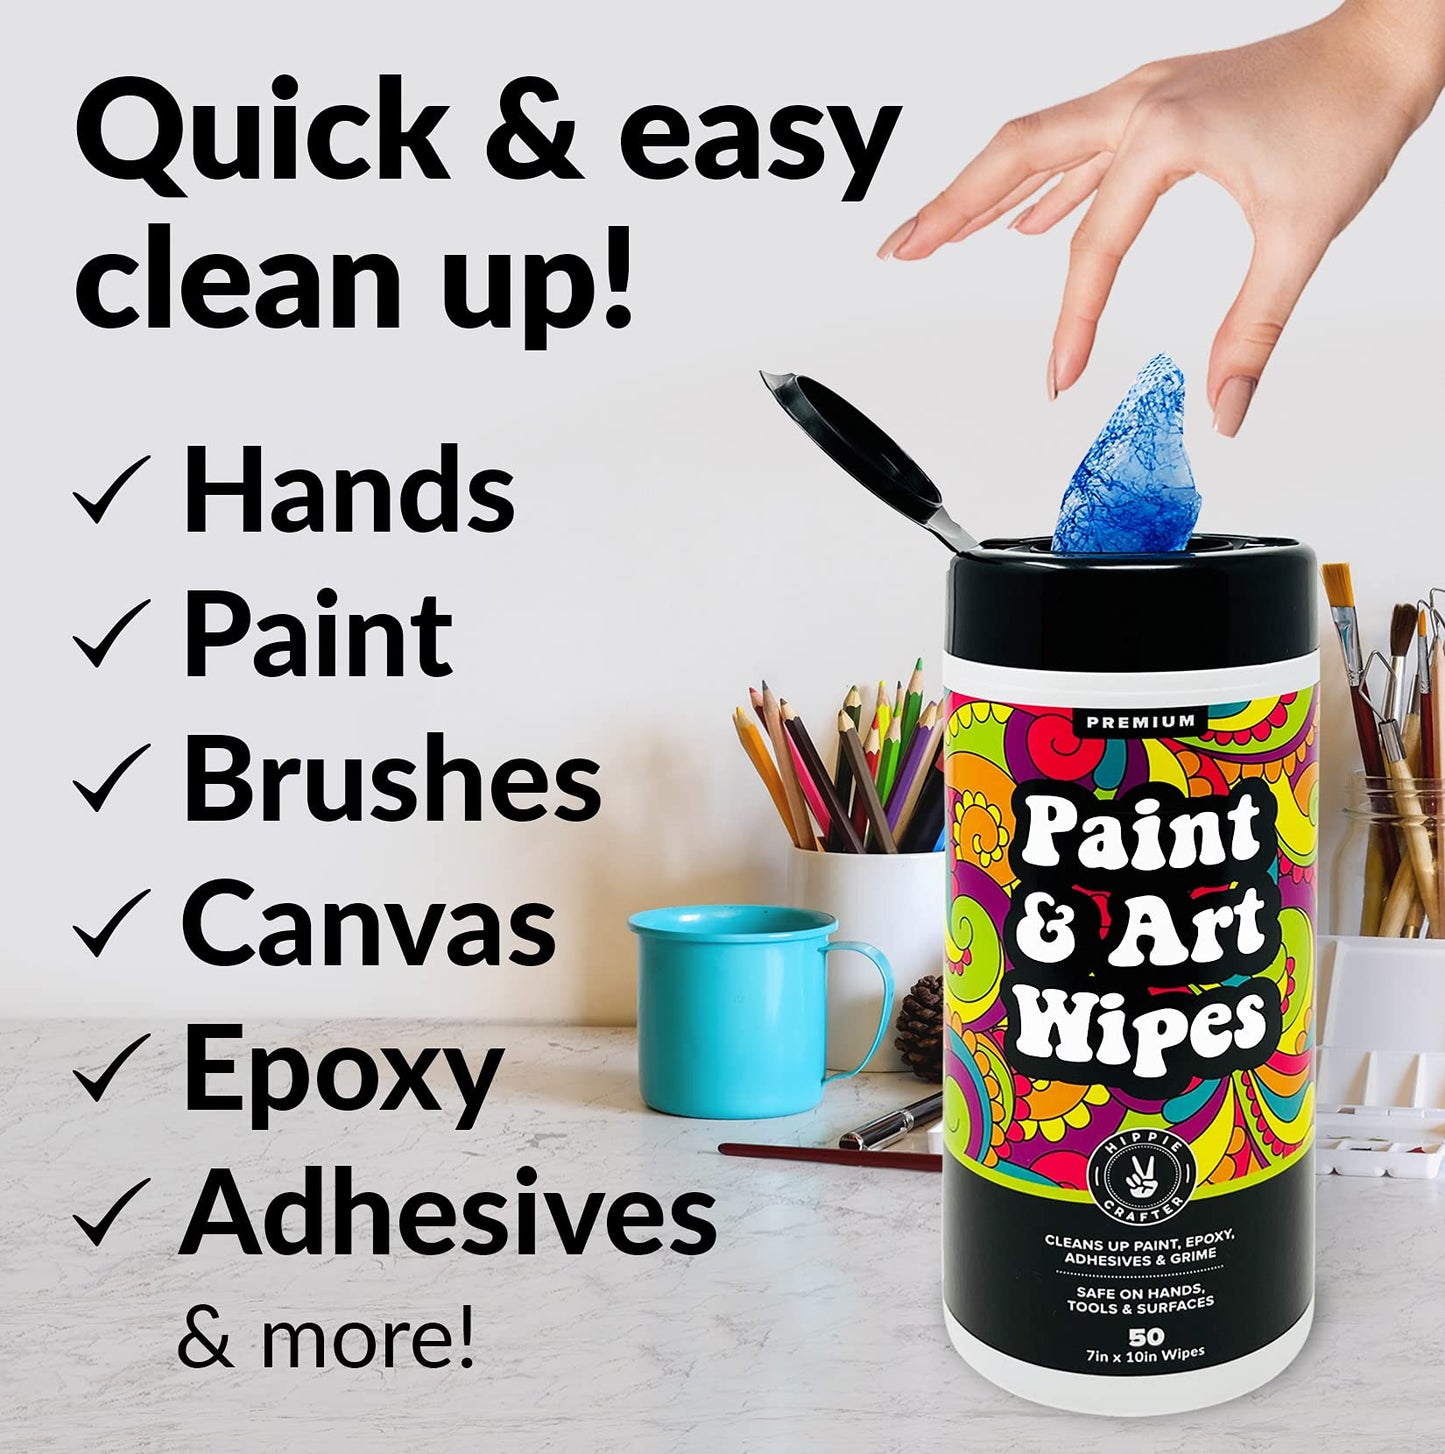 Paint & Art Wipes Paint Remover Wipes Cleaner Epoxy Glue Stains Latex, Acrylic Hand Cleaner and Plastic, Metal or Wood Surfaces, Floors, Brushes,